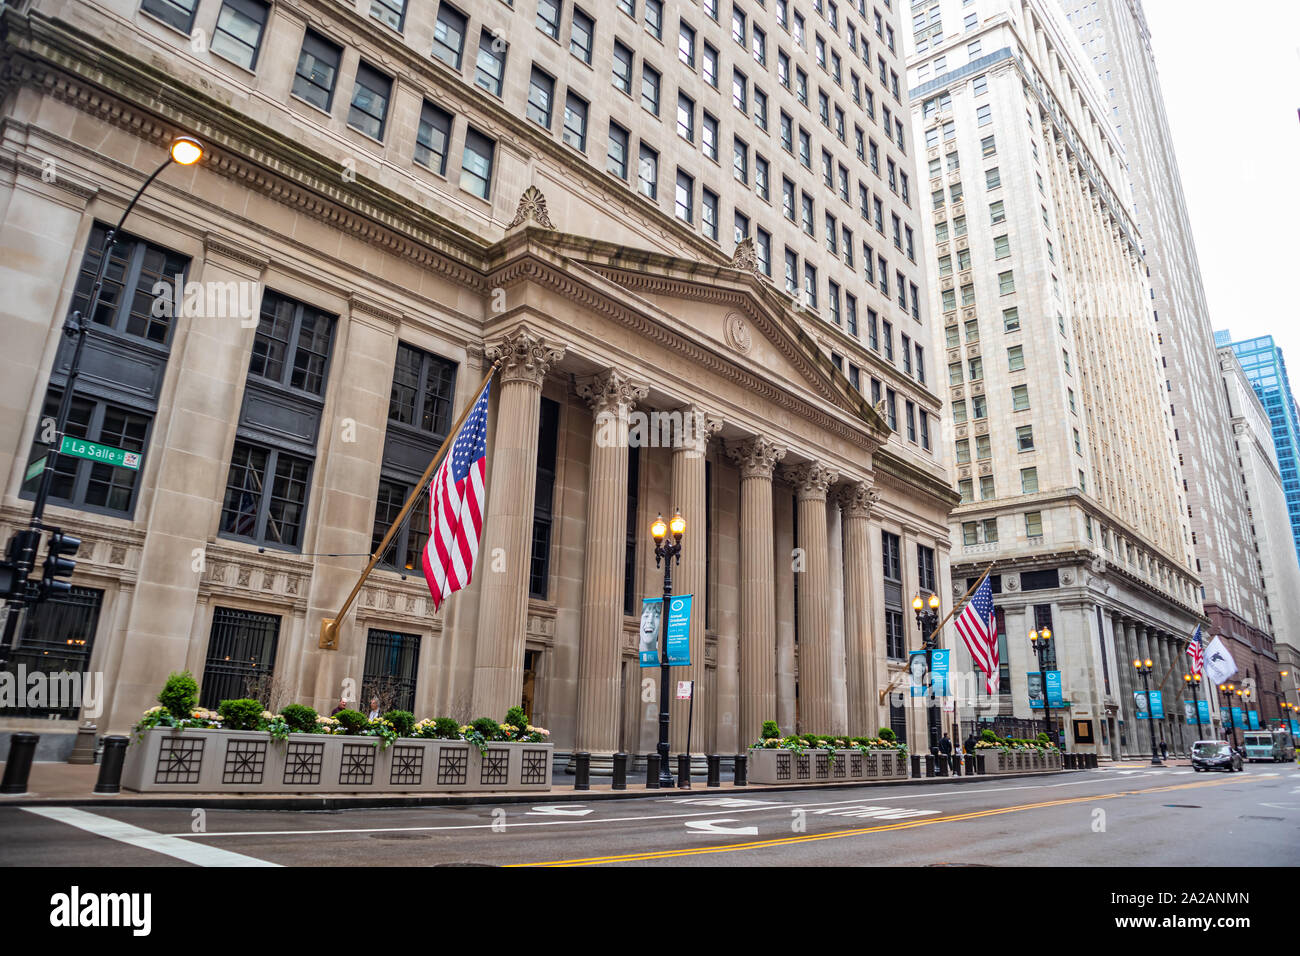 Chicago, Illinois, USA. May 9, 2019. Side view of the Federal Reserve Bank of Chicago. Stone building with corinthian colonnades background. Stock Photo